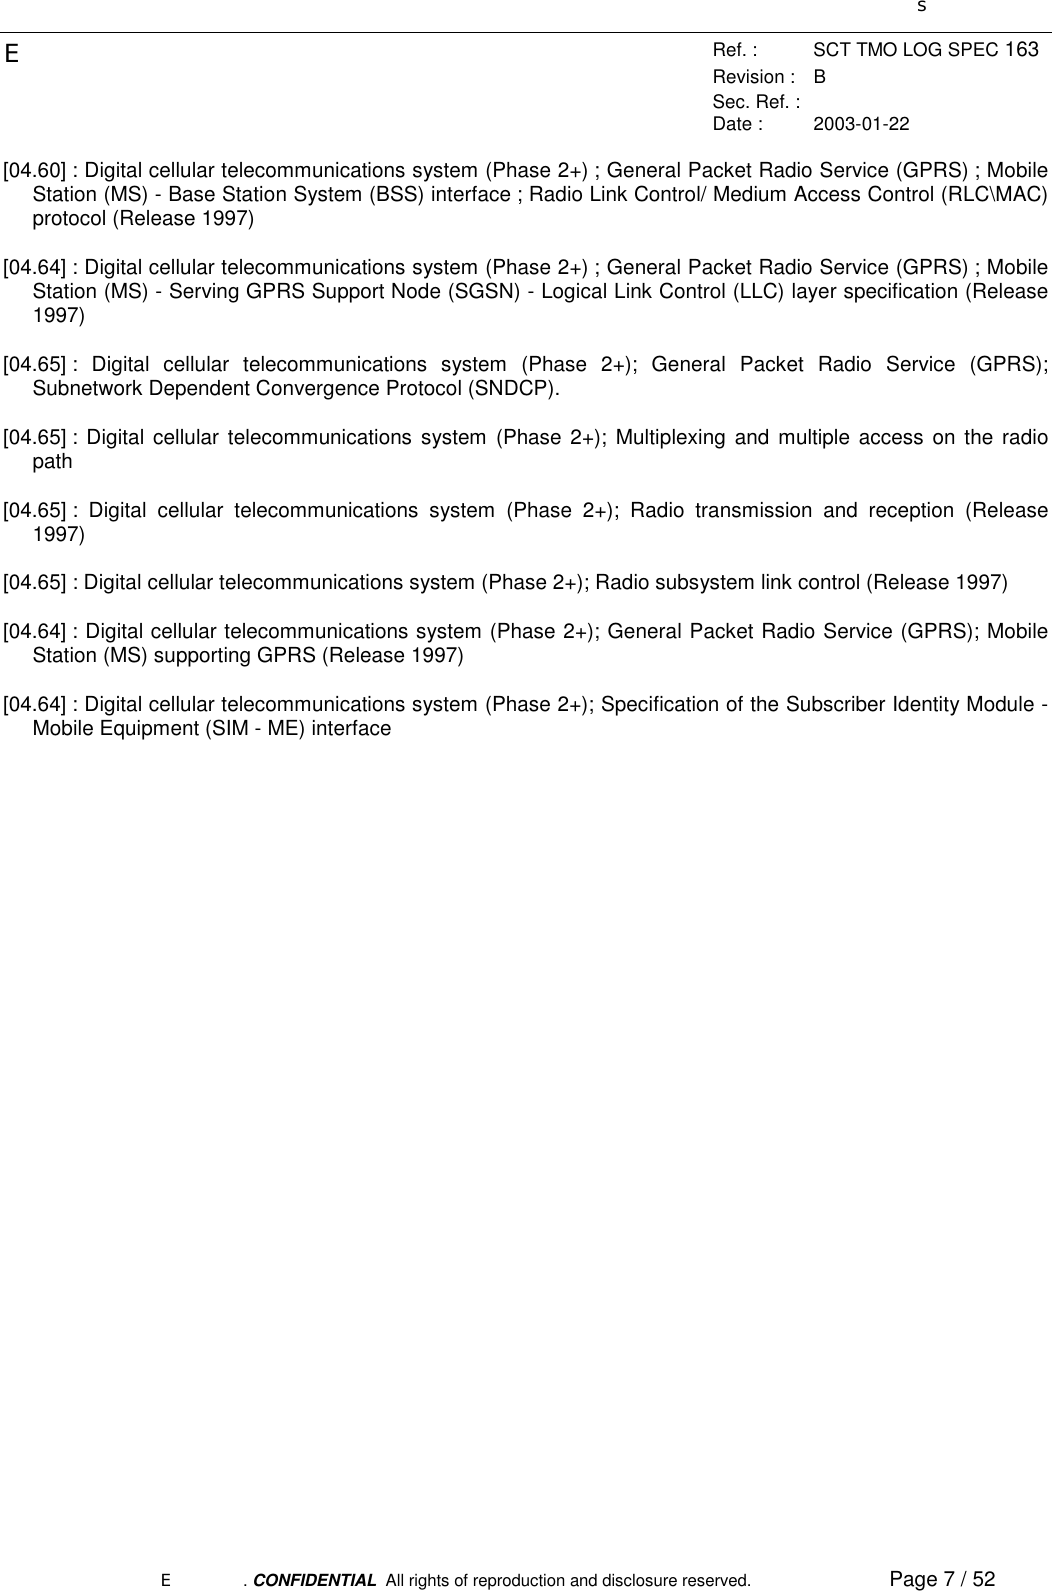 sERef. : SCT TMO LOG SPEC 163Revision : BSec. Ref. :Date : 2003-01-22E. CONFIDENTIAL  All rights of reproduction and disclosure reserved. Page 7 / 52 [04.60] : Digital cellular telecommunications system (Phase 2+) ; General Packet Radio Service (GPRS) ; MobileStation (MS) - Base Station System (BSS) interface ; Radio Link Control/ Medium Access Control (RLC\MAC)protocol (Release 1997) [04.64] : Digital cellular telecommunications system (Phase 2+) ; General Packet Radio Service (GPRS) ; MobileStation (MS) - Serving GPRS Support Node (SGSN) - Logical Link Control (LLC) layer specification (Release1997) [04.65] : Digital cellular telecommunications system (Phase 2+); General Packet Radio Service (GPRS);Subnetwork Dependent Convergence Protocol (SNDCP). [04.65] : Digital cellular telecommunications system (Phase 2+); Multiplexing and multiple access on the radiopath [04.65] : Digital cellular telecommunications system (Phase 2+); Radio transmission and reception (Release1997) [04.65] : Digital cellular telecommunications system (Phase 2+); Radio subsystem link control (Release 1997) [04.64] : Digital cellular telecommunications system (Phase 2+); General Packet Radio Service (GPRS); MobileStation (MS) supporting GPRS (Release 1997) [04.64] : Digital cellular telecommunications system (Phase 2+); Specification of the Subscriber Identity Module -Mobile Equipment (SIM - ME) interface 